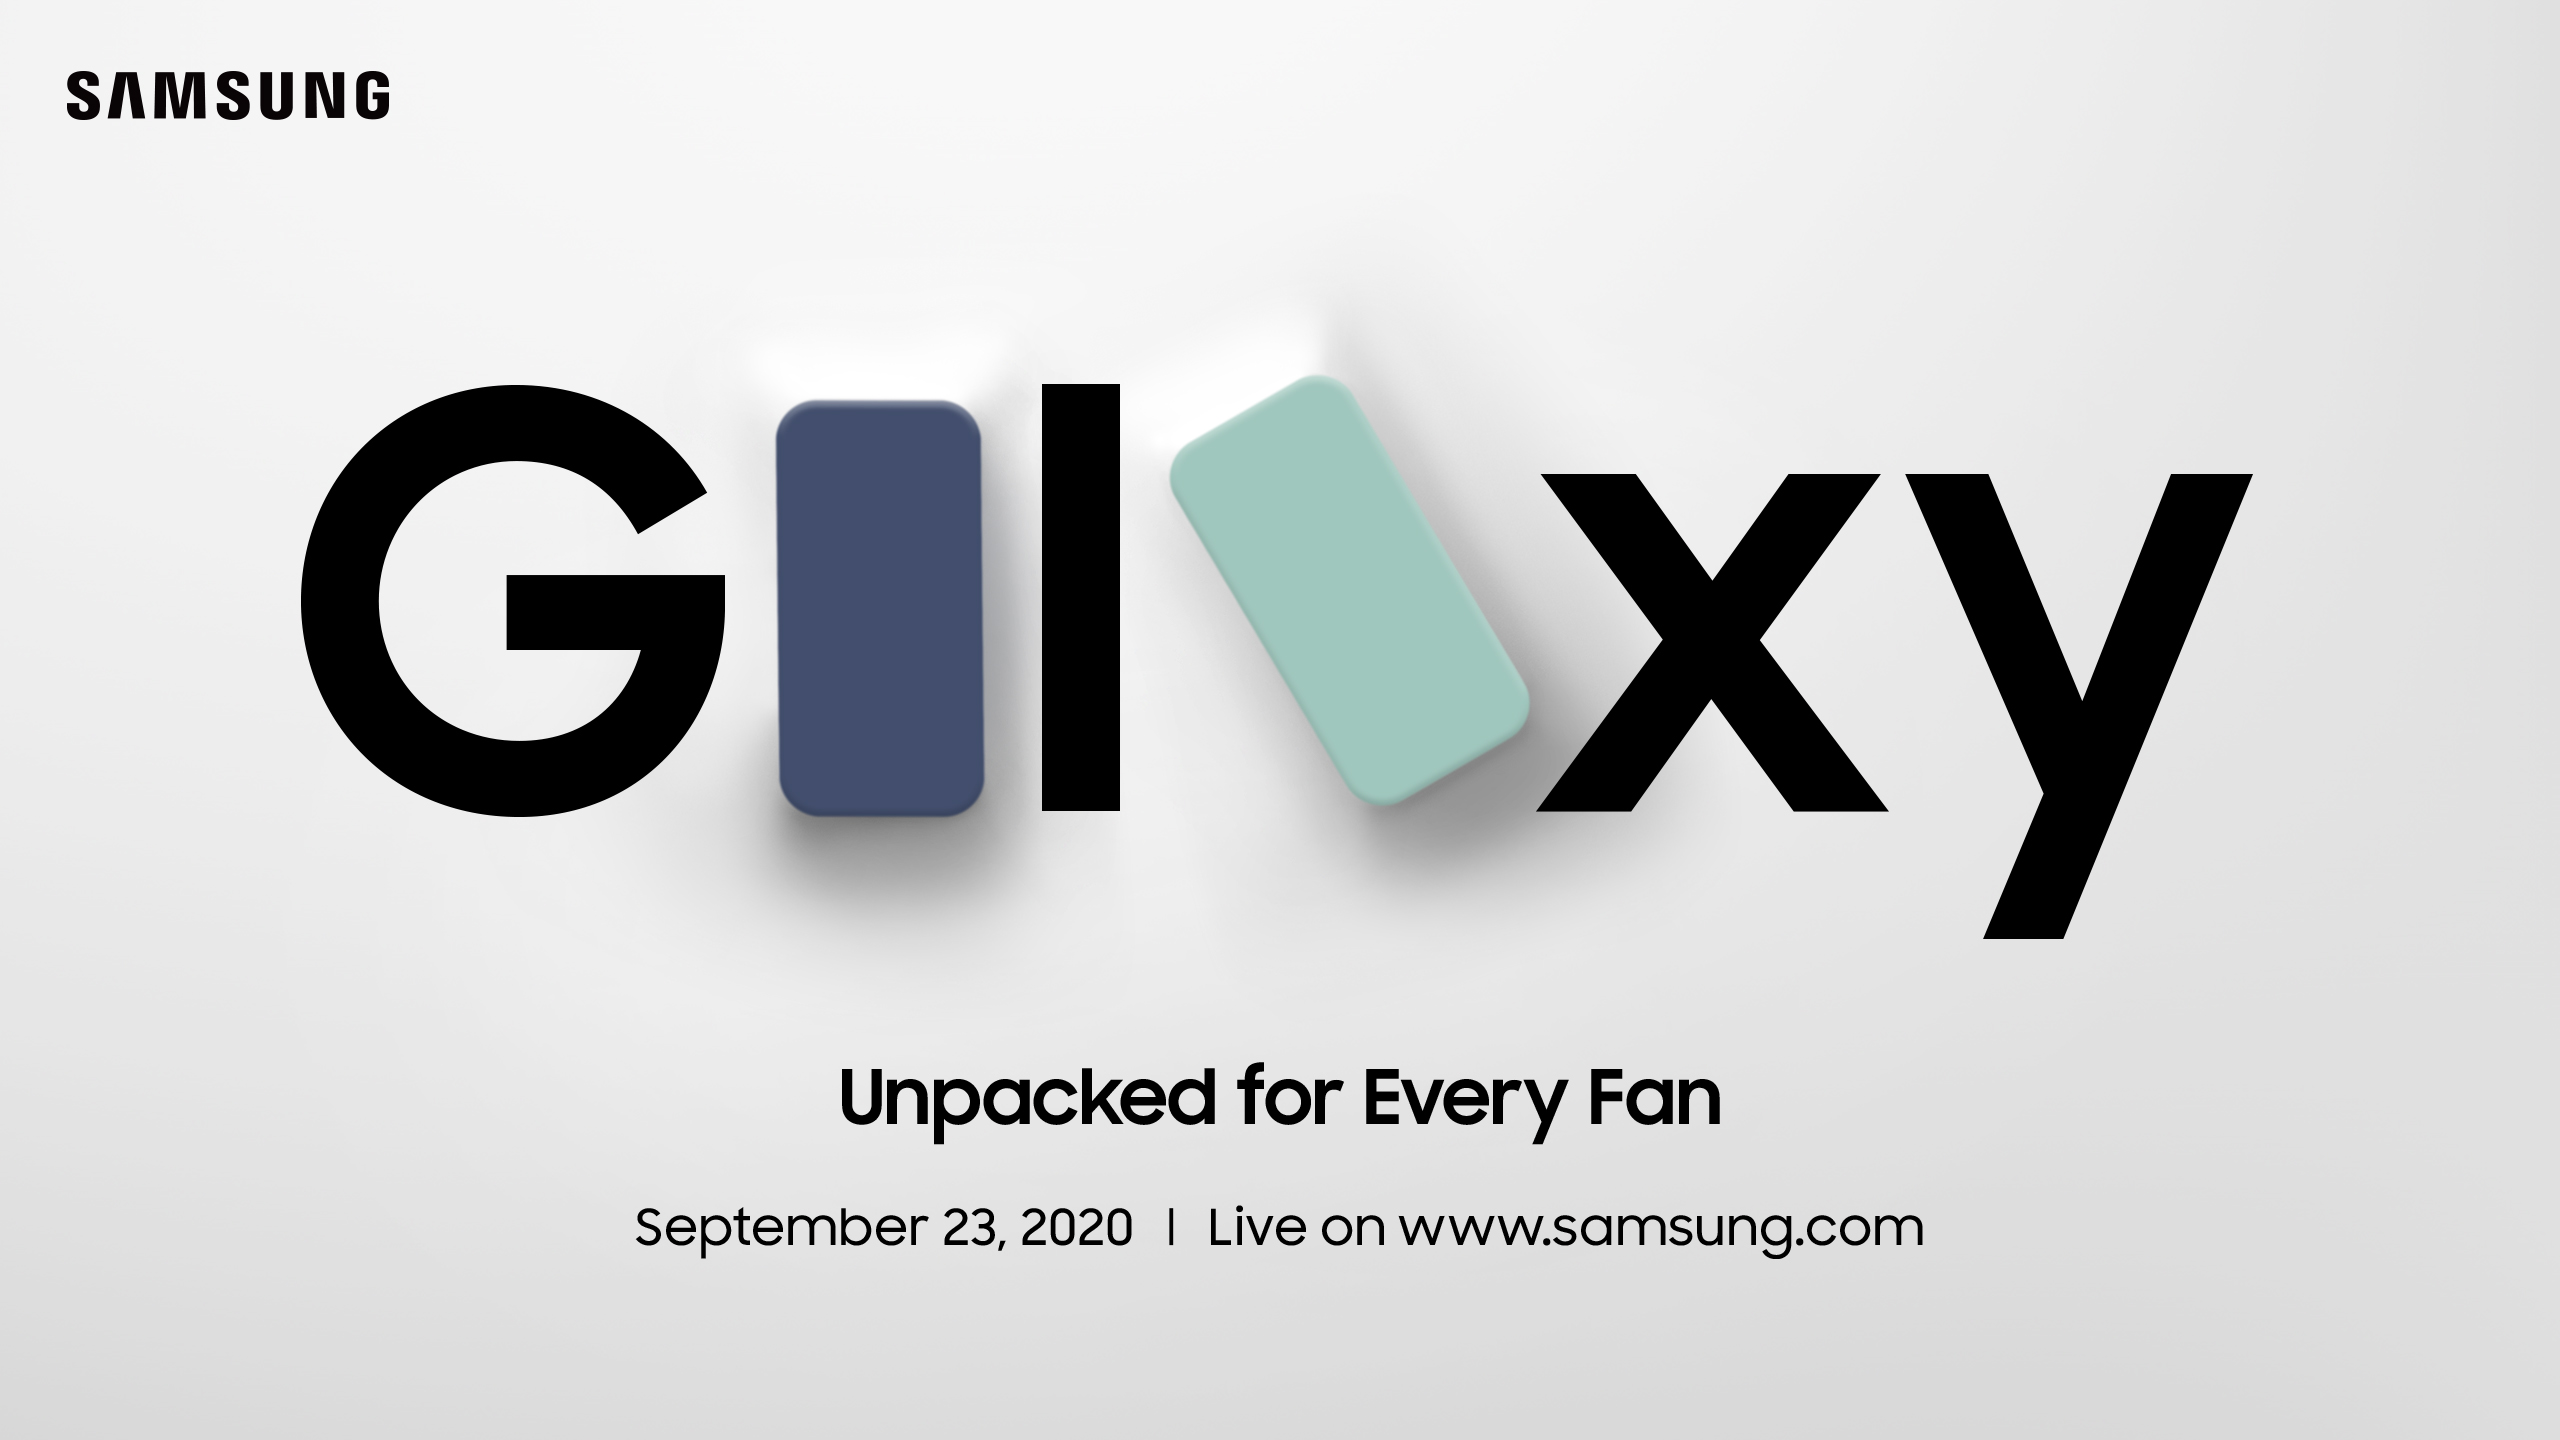 Galaxy unpacked for everyone invitation with navy and mint